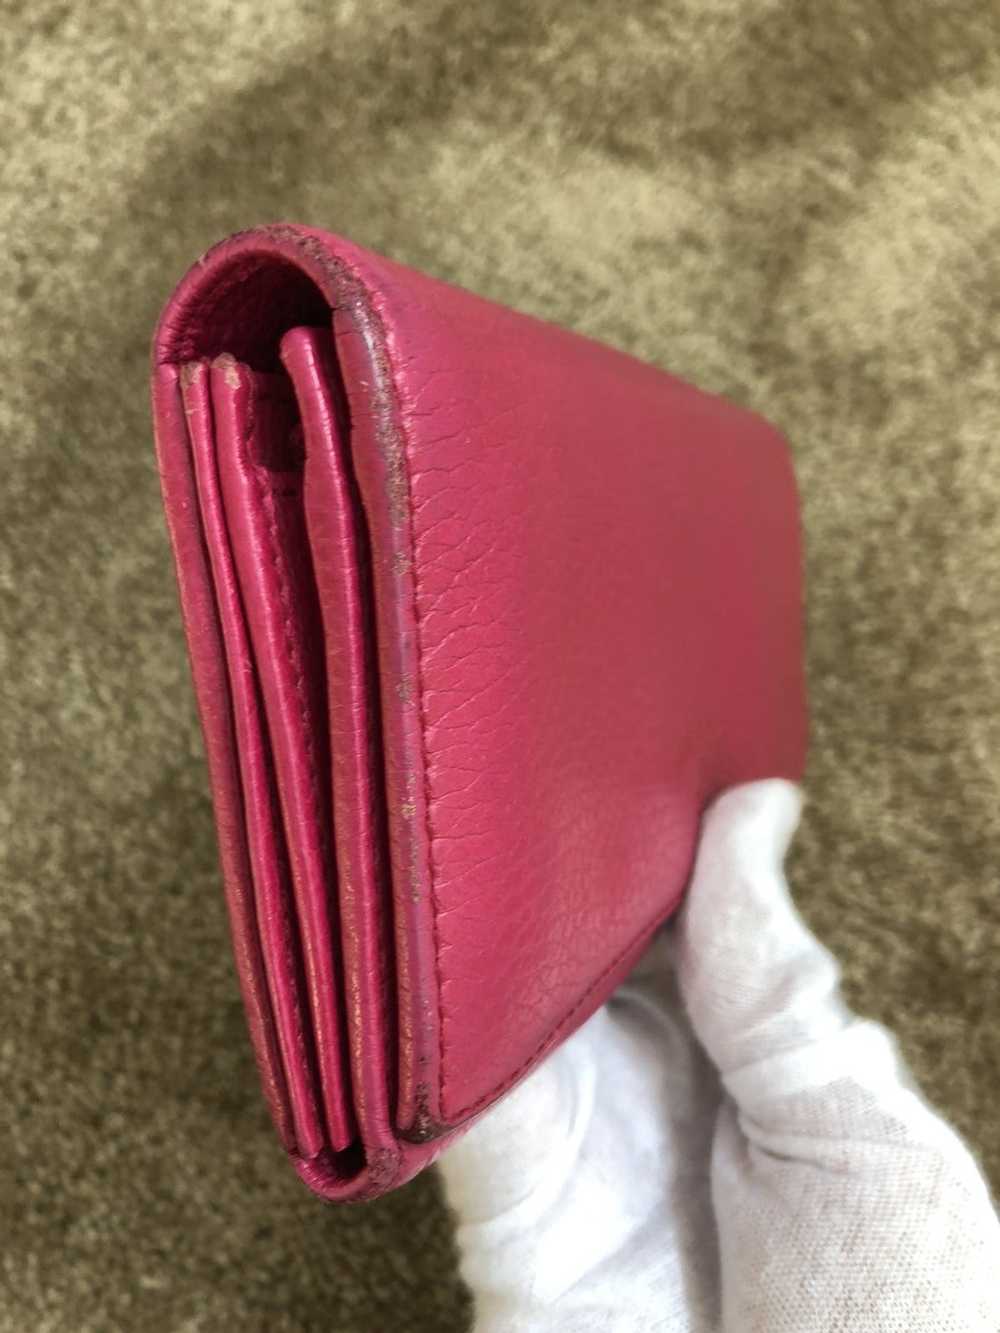 Gucci Gucci pink leather long wallet - image 4